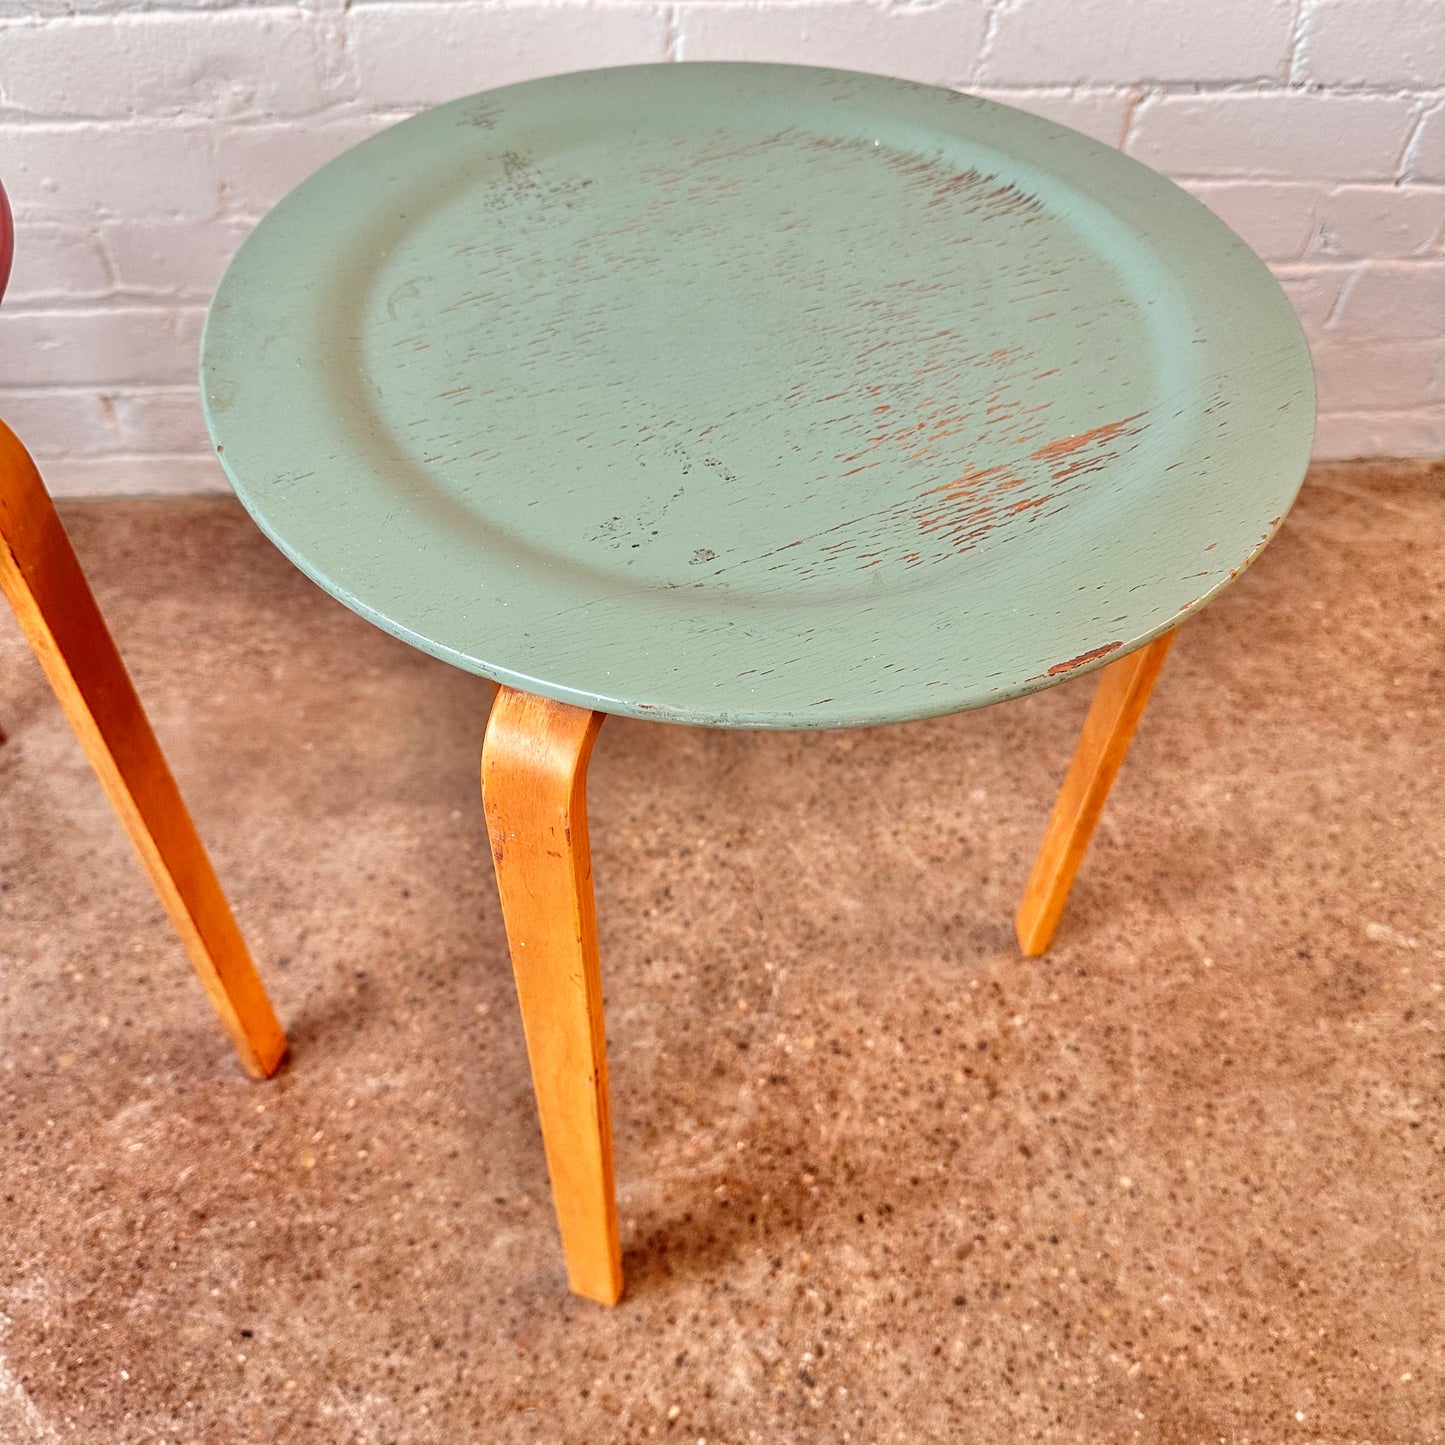 SET OF 3 ROUND STACKING TABLES BODAFORS, SWEDEN C. 1950S